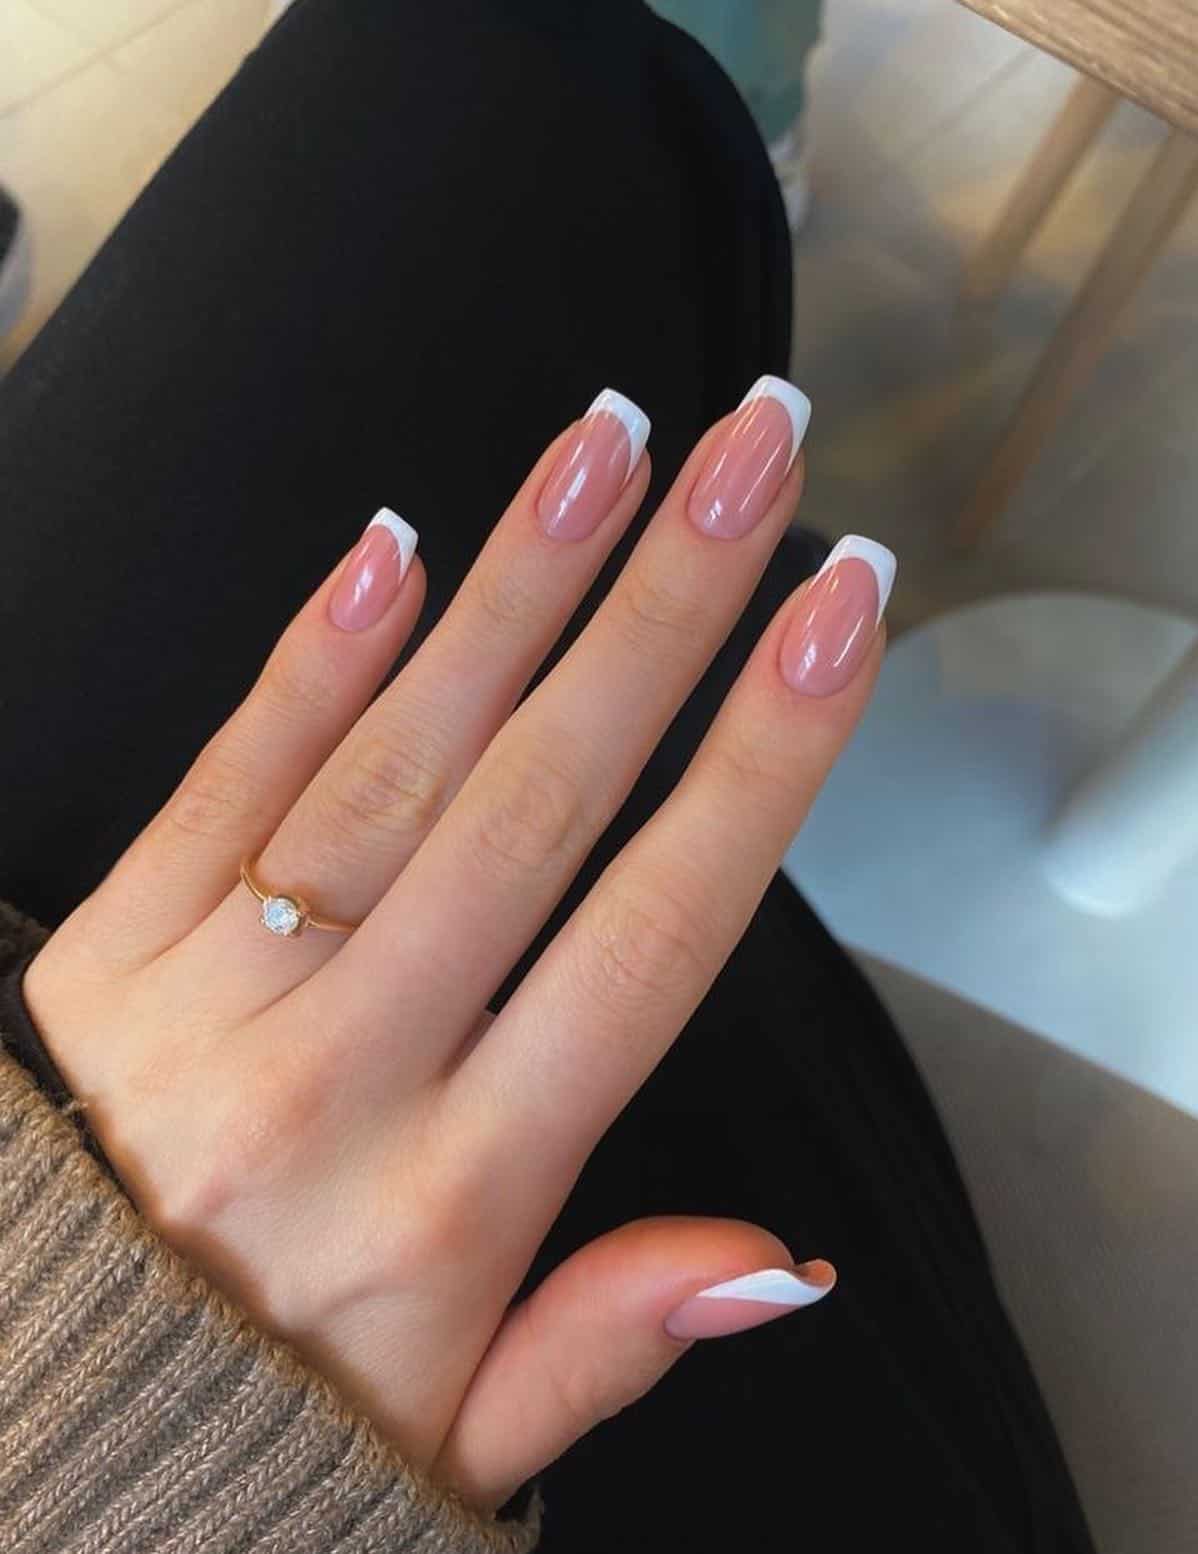 A hand with short square nails painted with nude polish, white tips, and a glossy finish